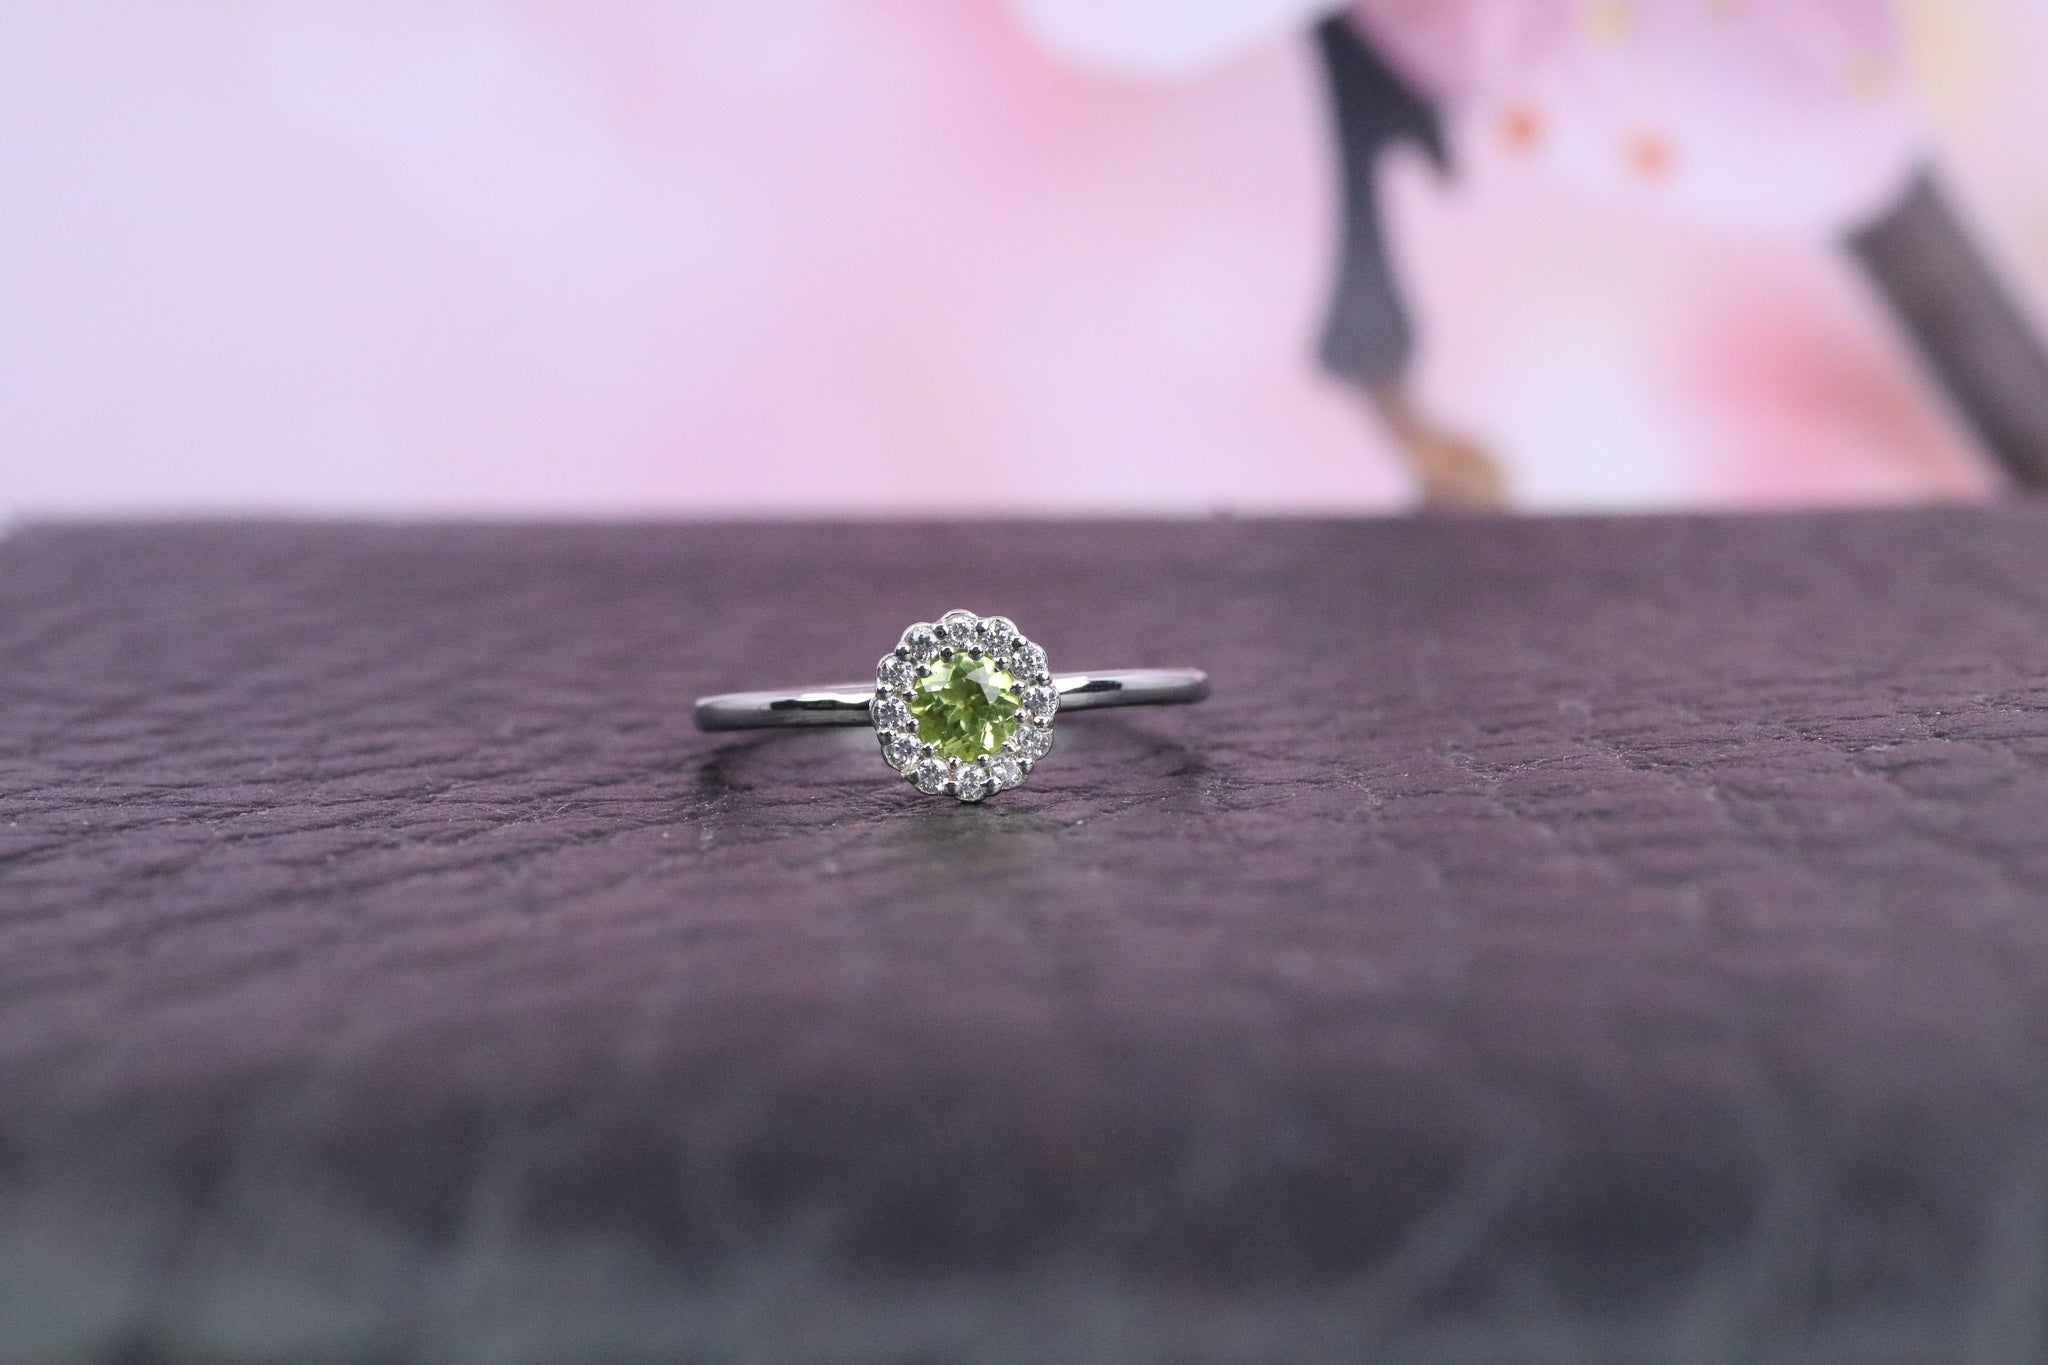 Sterling Silver & August Birthstone Ring - AK1106 - Hallmark Jewellers Formby & The Jewellers Bench Widnes